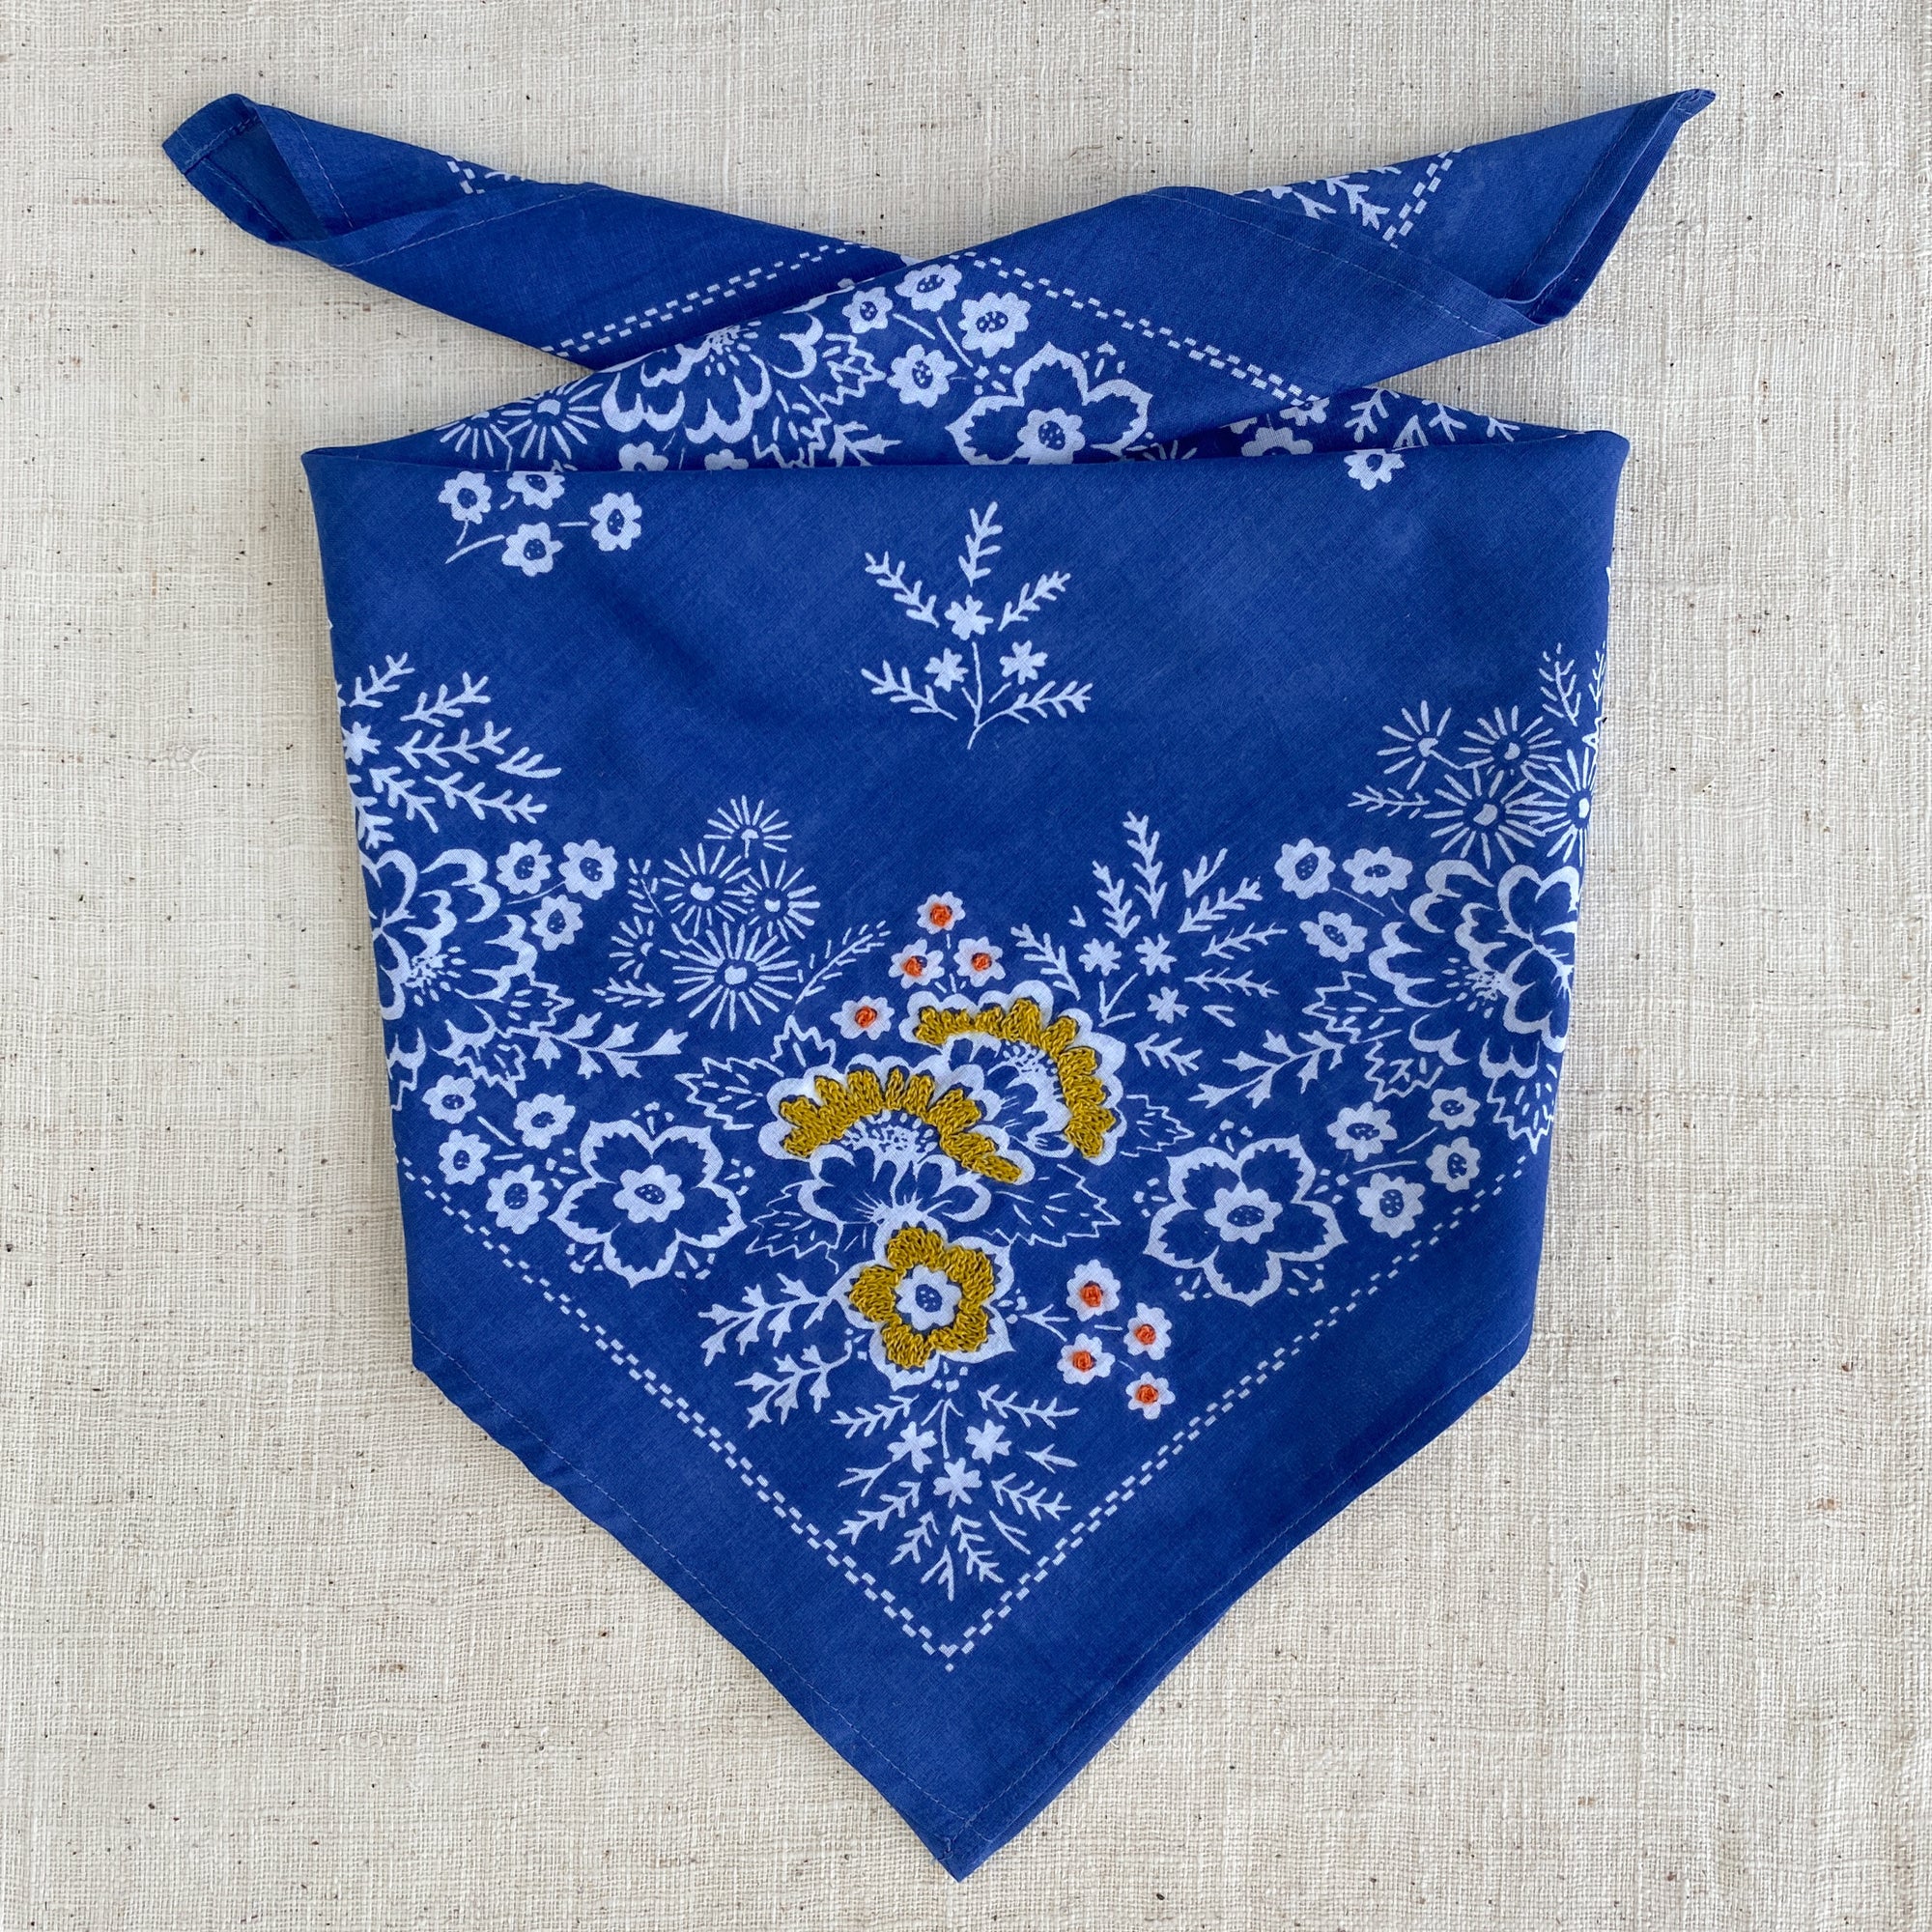 Embroidered Azure Field Bandana-Cotton – DieTrying TX